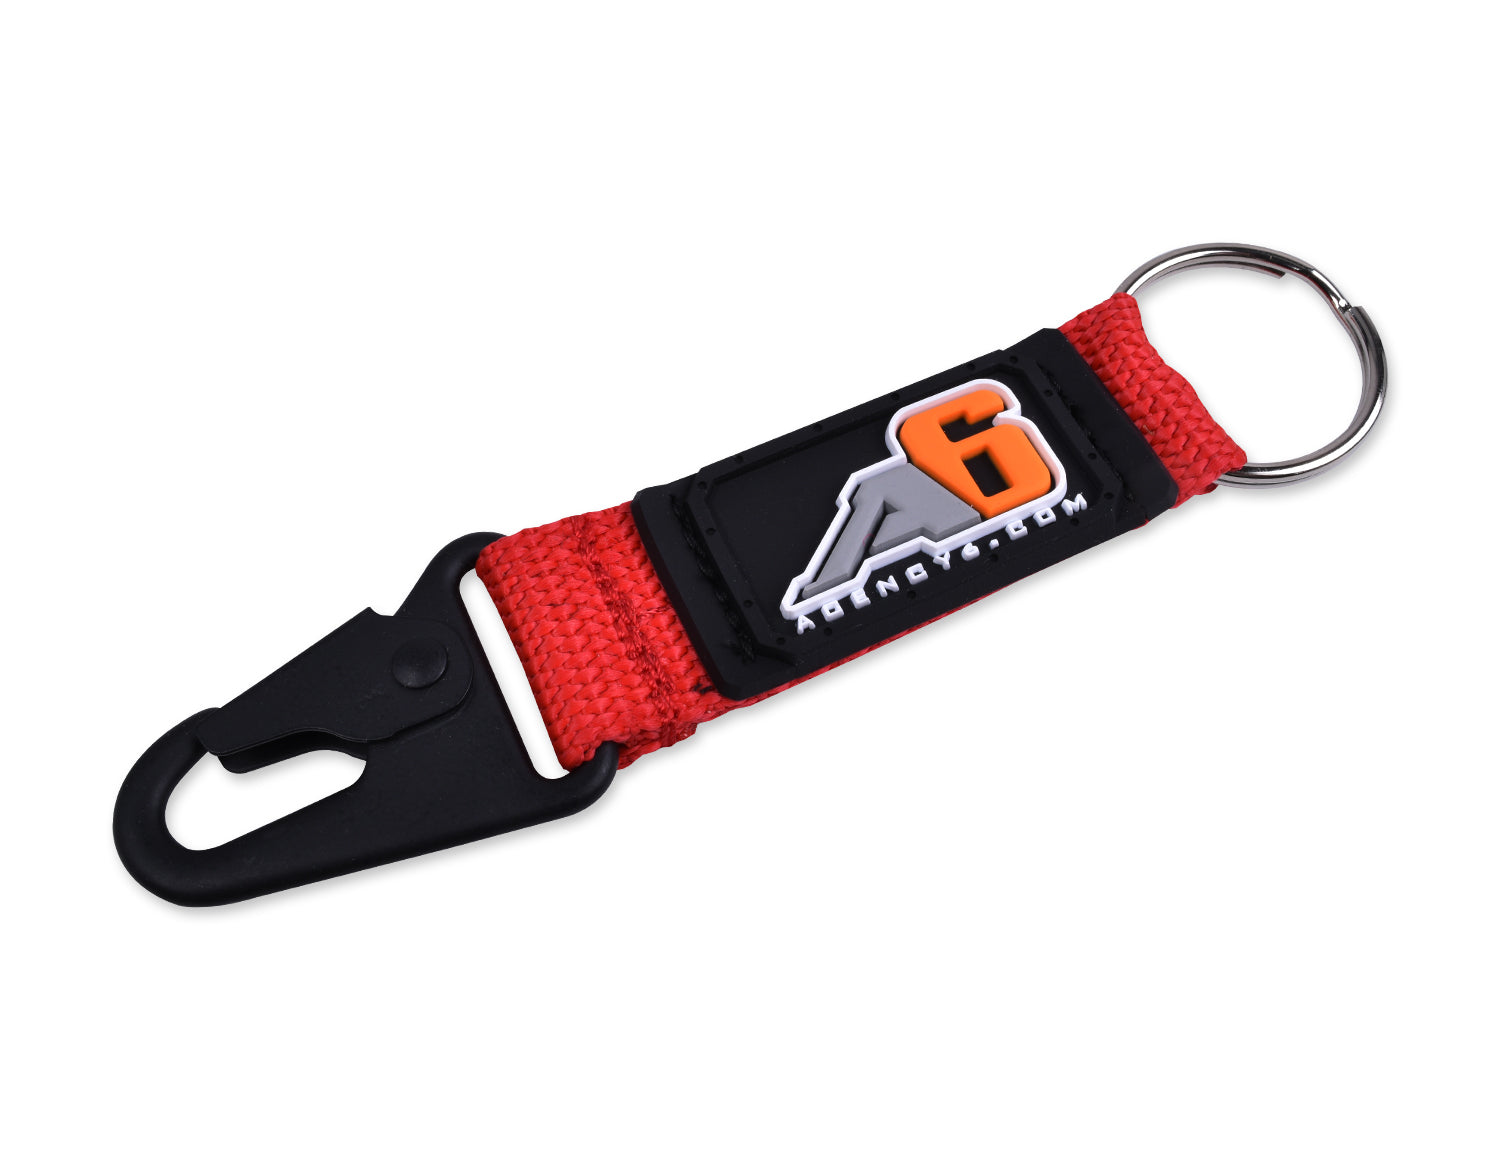 Agency 6 Key Chain - Red